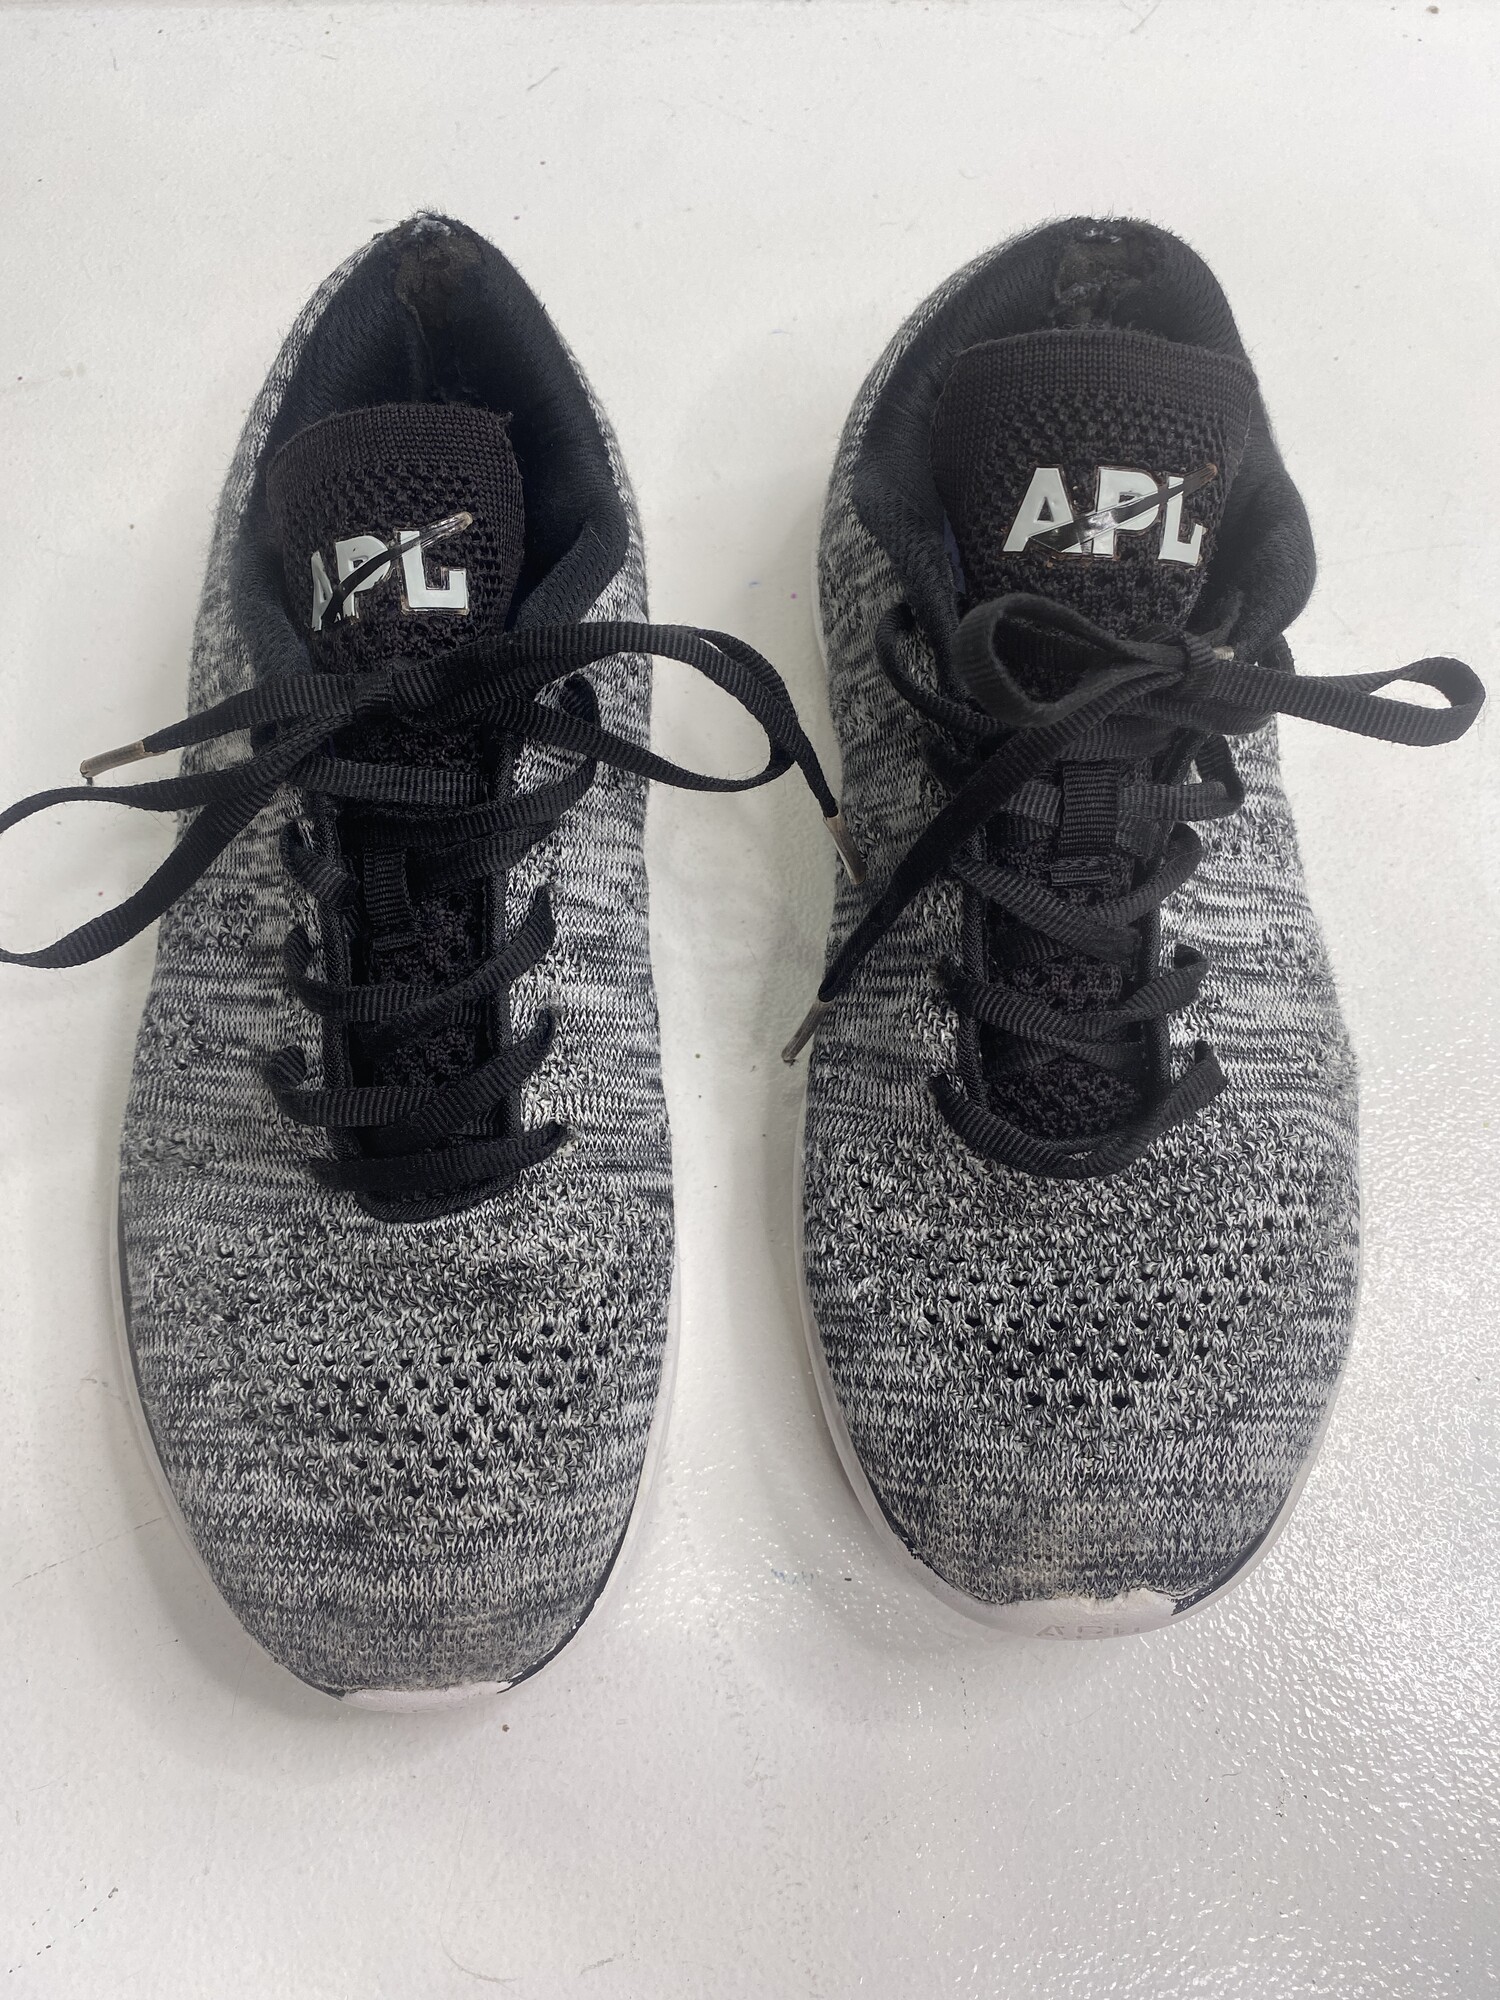 APL Sneakers, Size: 9.5, Color: Grey